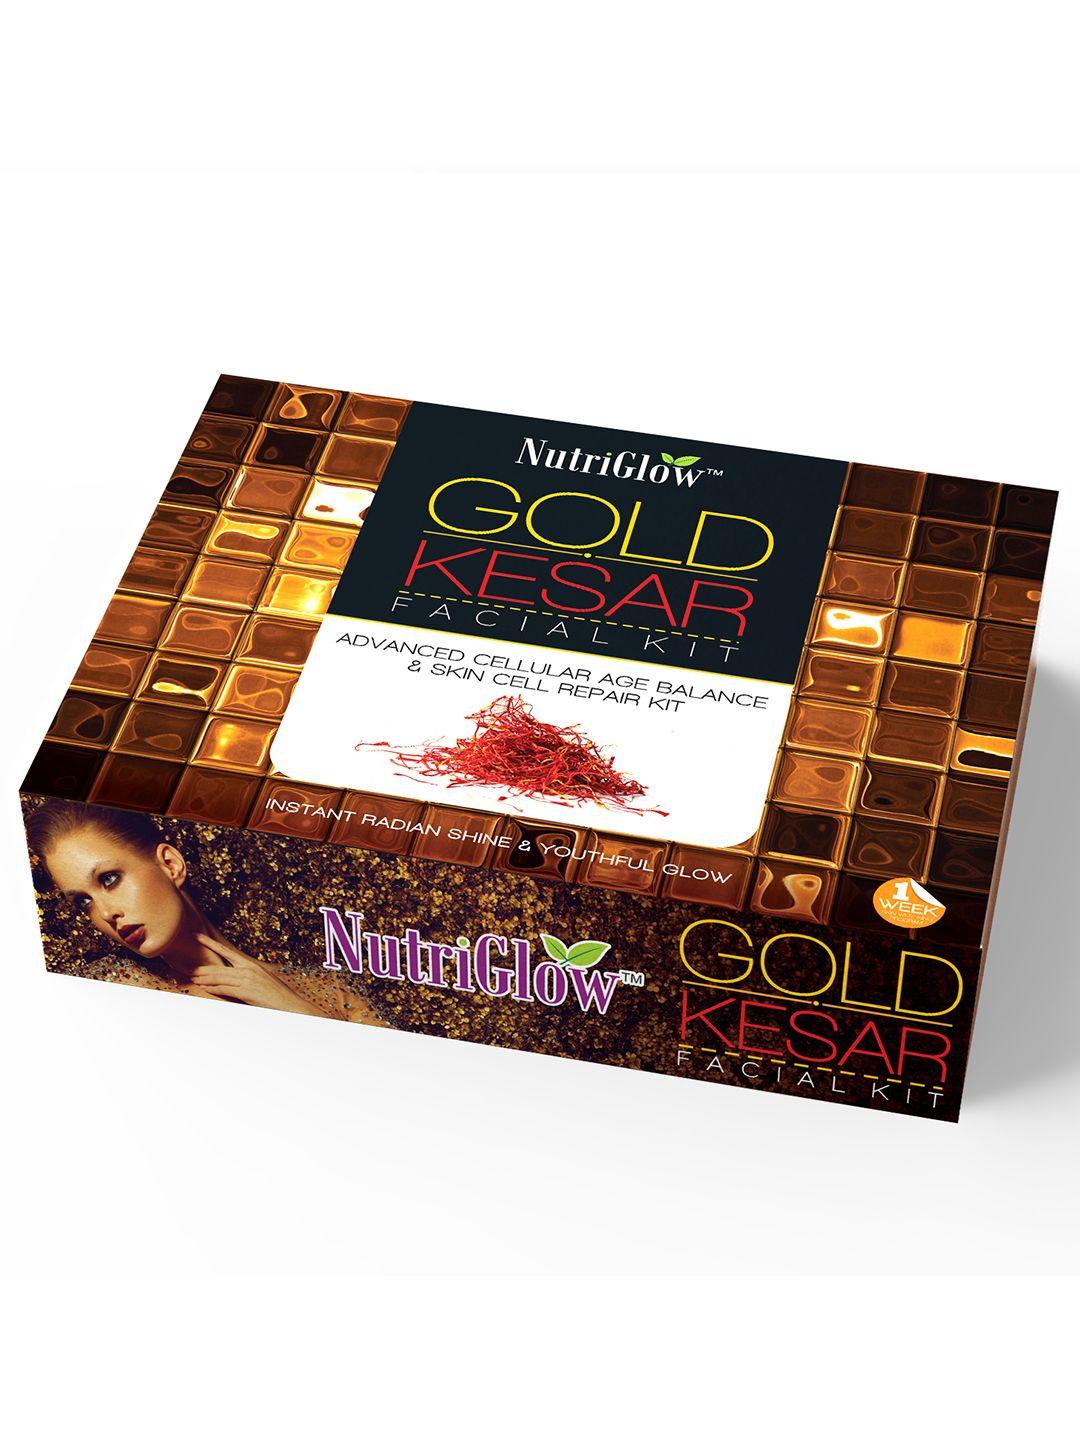 nutriglow sustainable 6-pieces of gold kesar facial kit for skin care, acne remove 250g+10ml